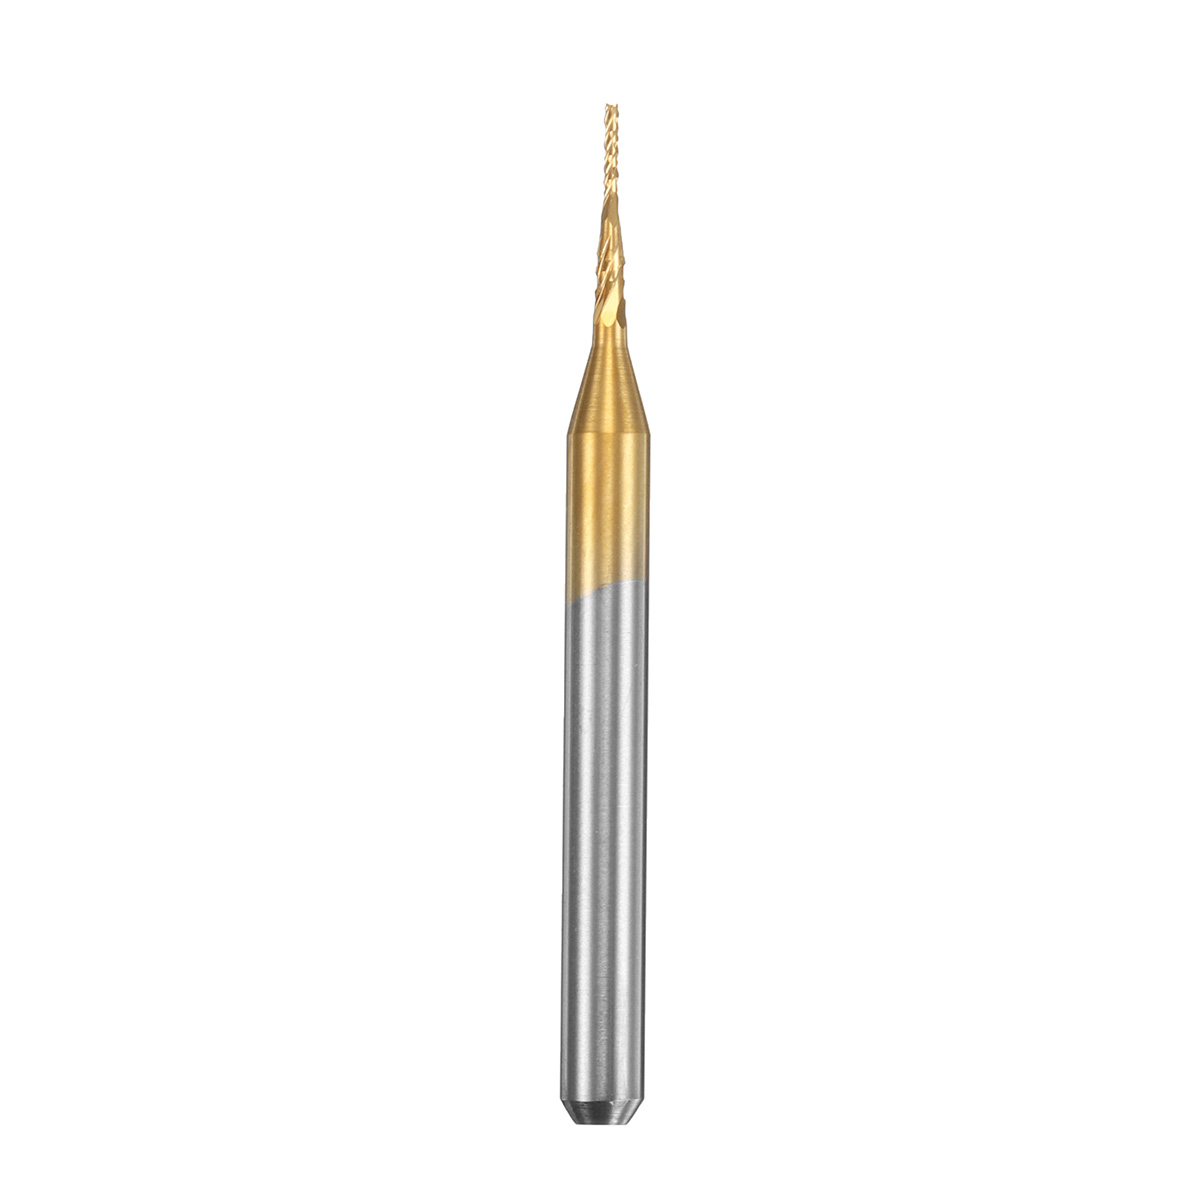 Drillpro-10pcs-08mm-Titanium-Coated-Engraving-Milling-Cutter-Carbide-End-Mill-Rotary-Burr-1531799-3